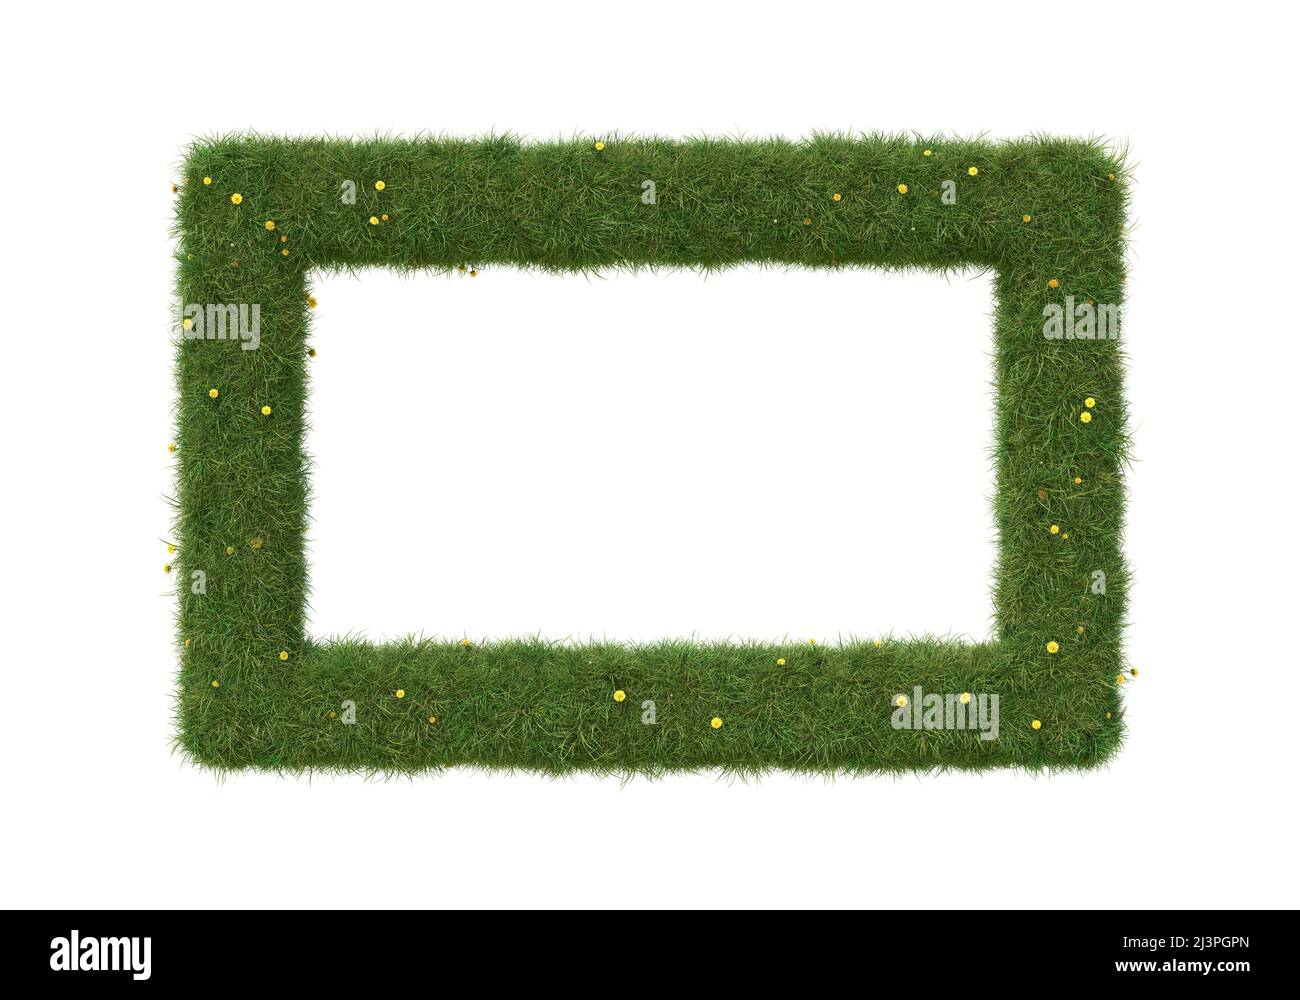 Rectangle shape frame made of grass and dandelions, isolated on white. 3D image Stock Photo